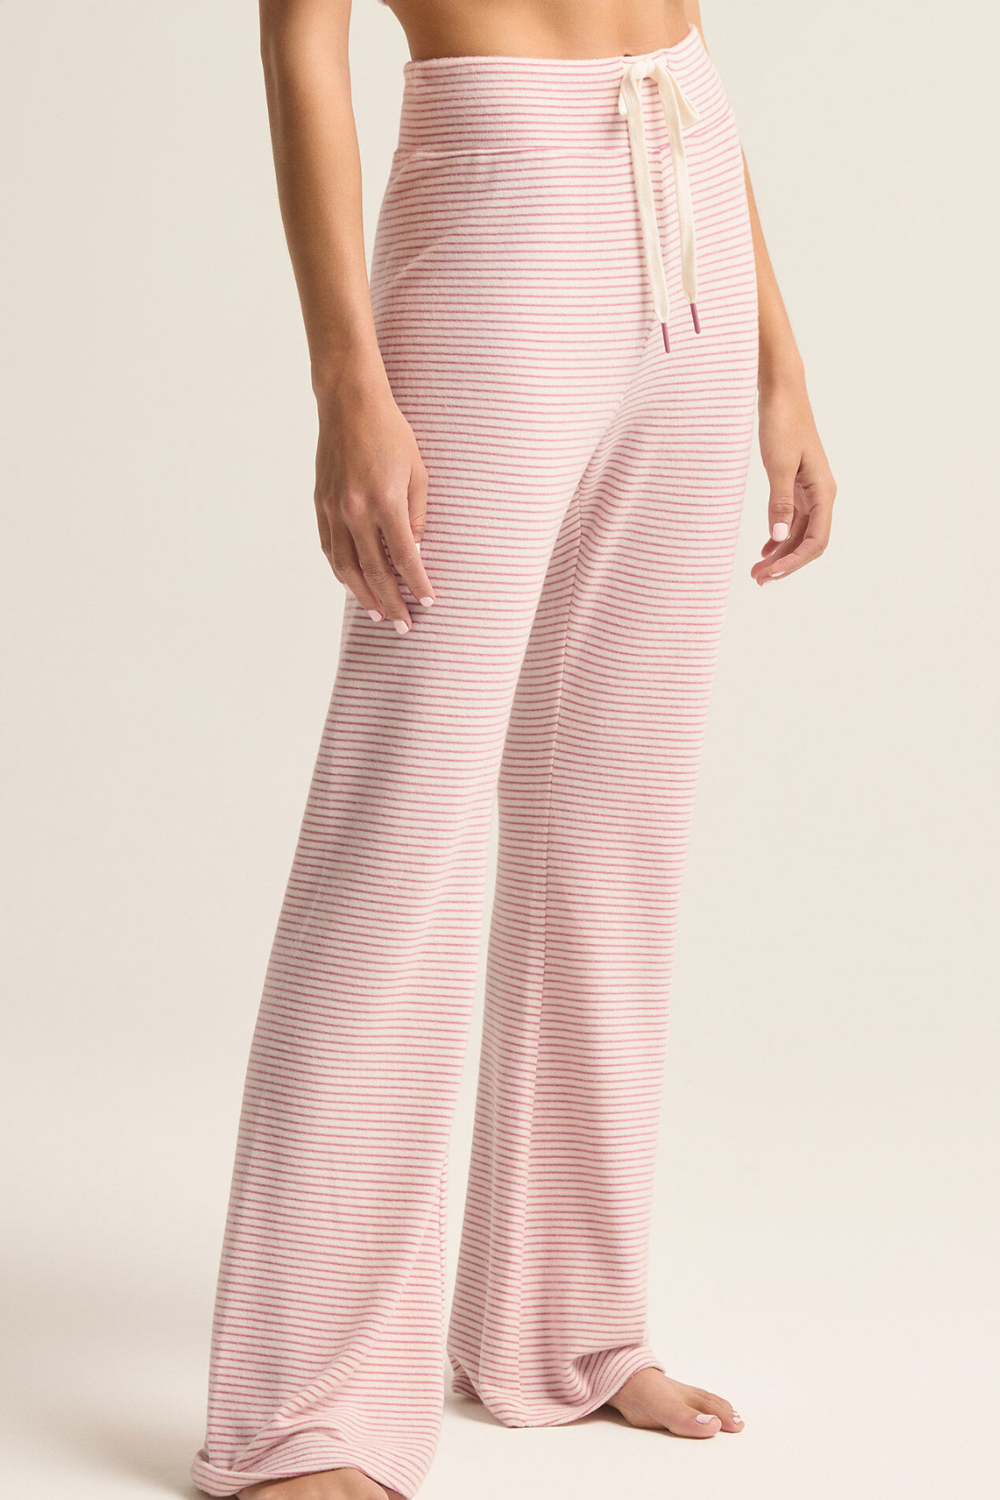 Z Supply In The Clouds Stripe Pant